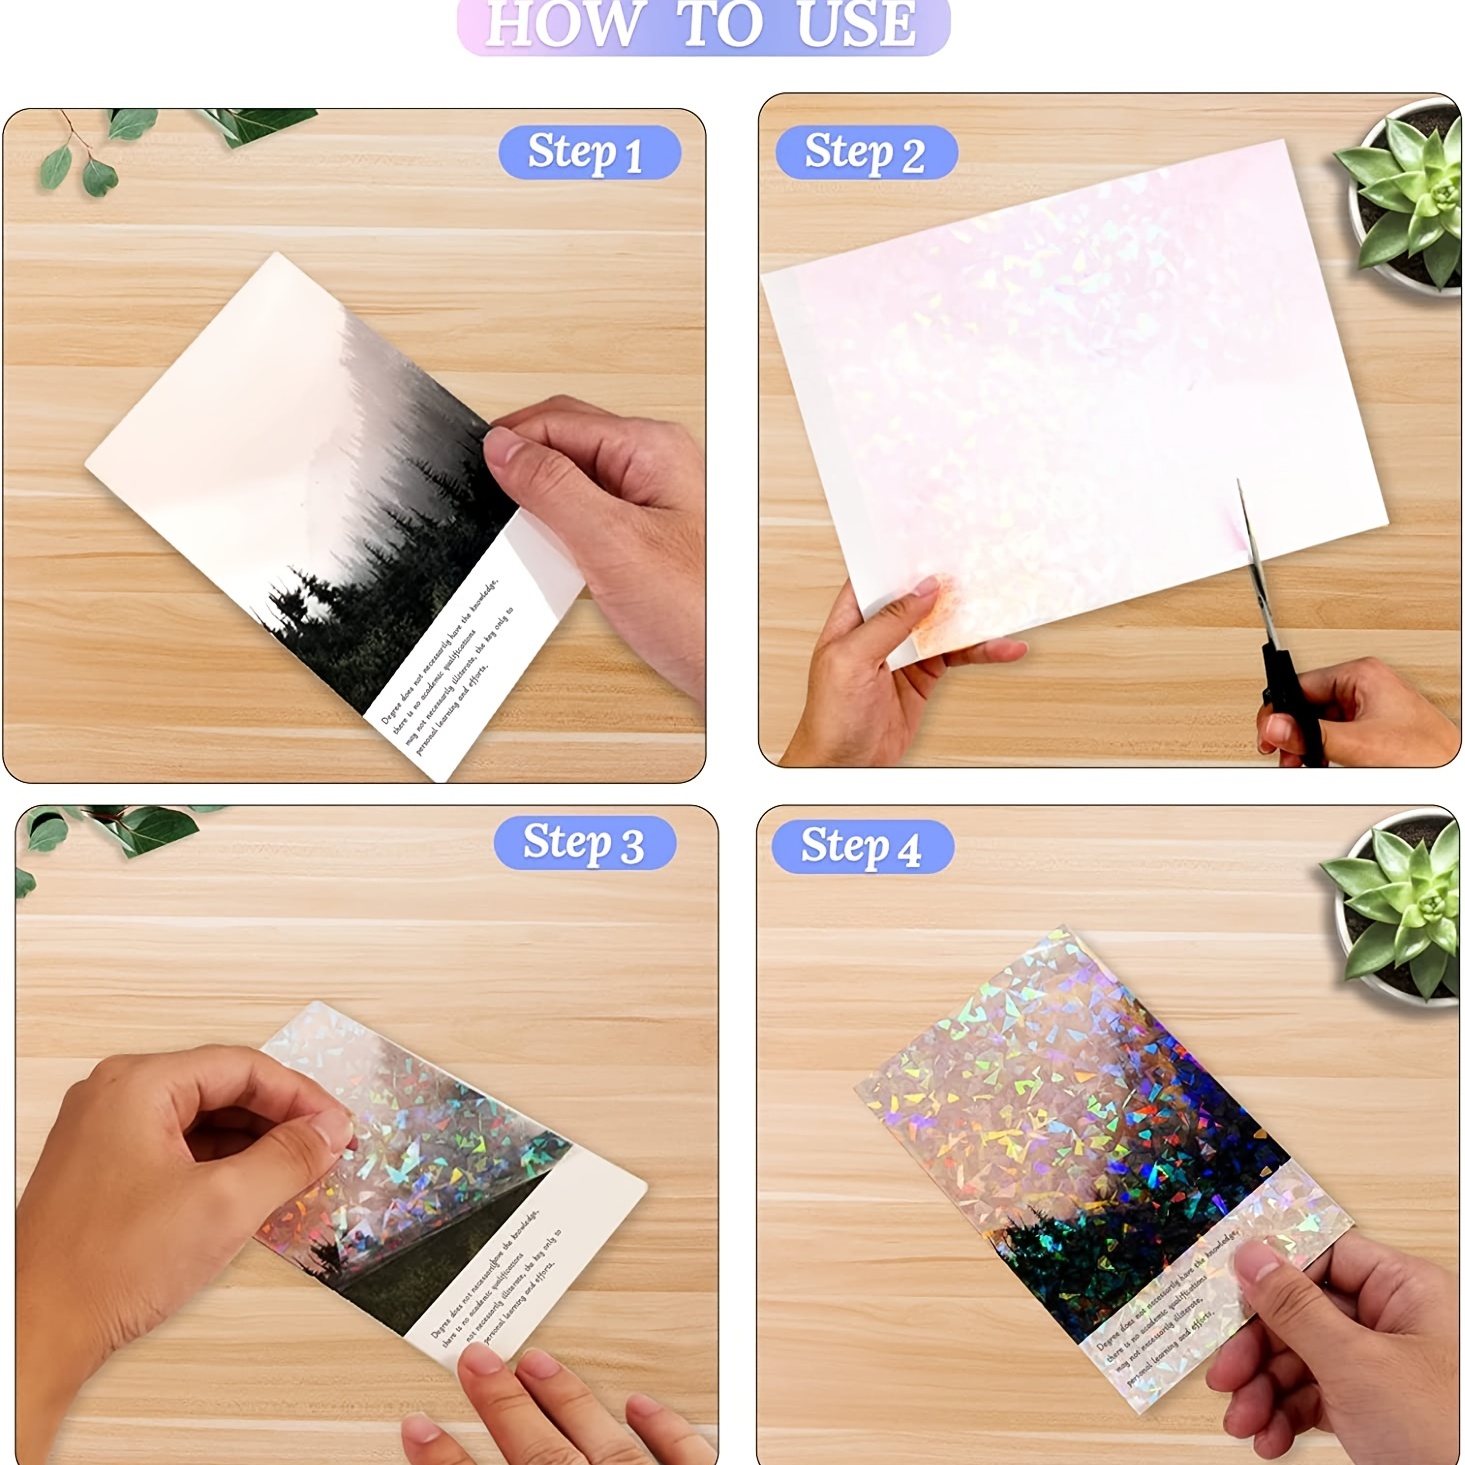 36 Sheets Vinyl Printable Sticker Paper A4 Size (8.25 x 11.7) Glossy  Holographic Sticker Paper Self-Adhesive Waterproof Dries Quickly For